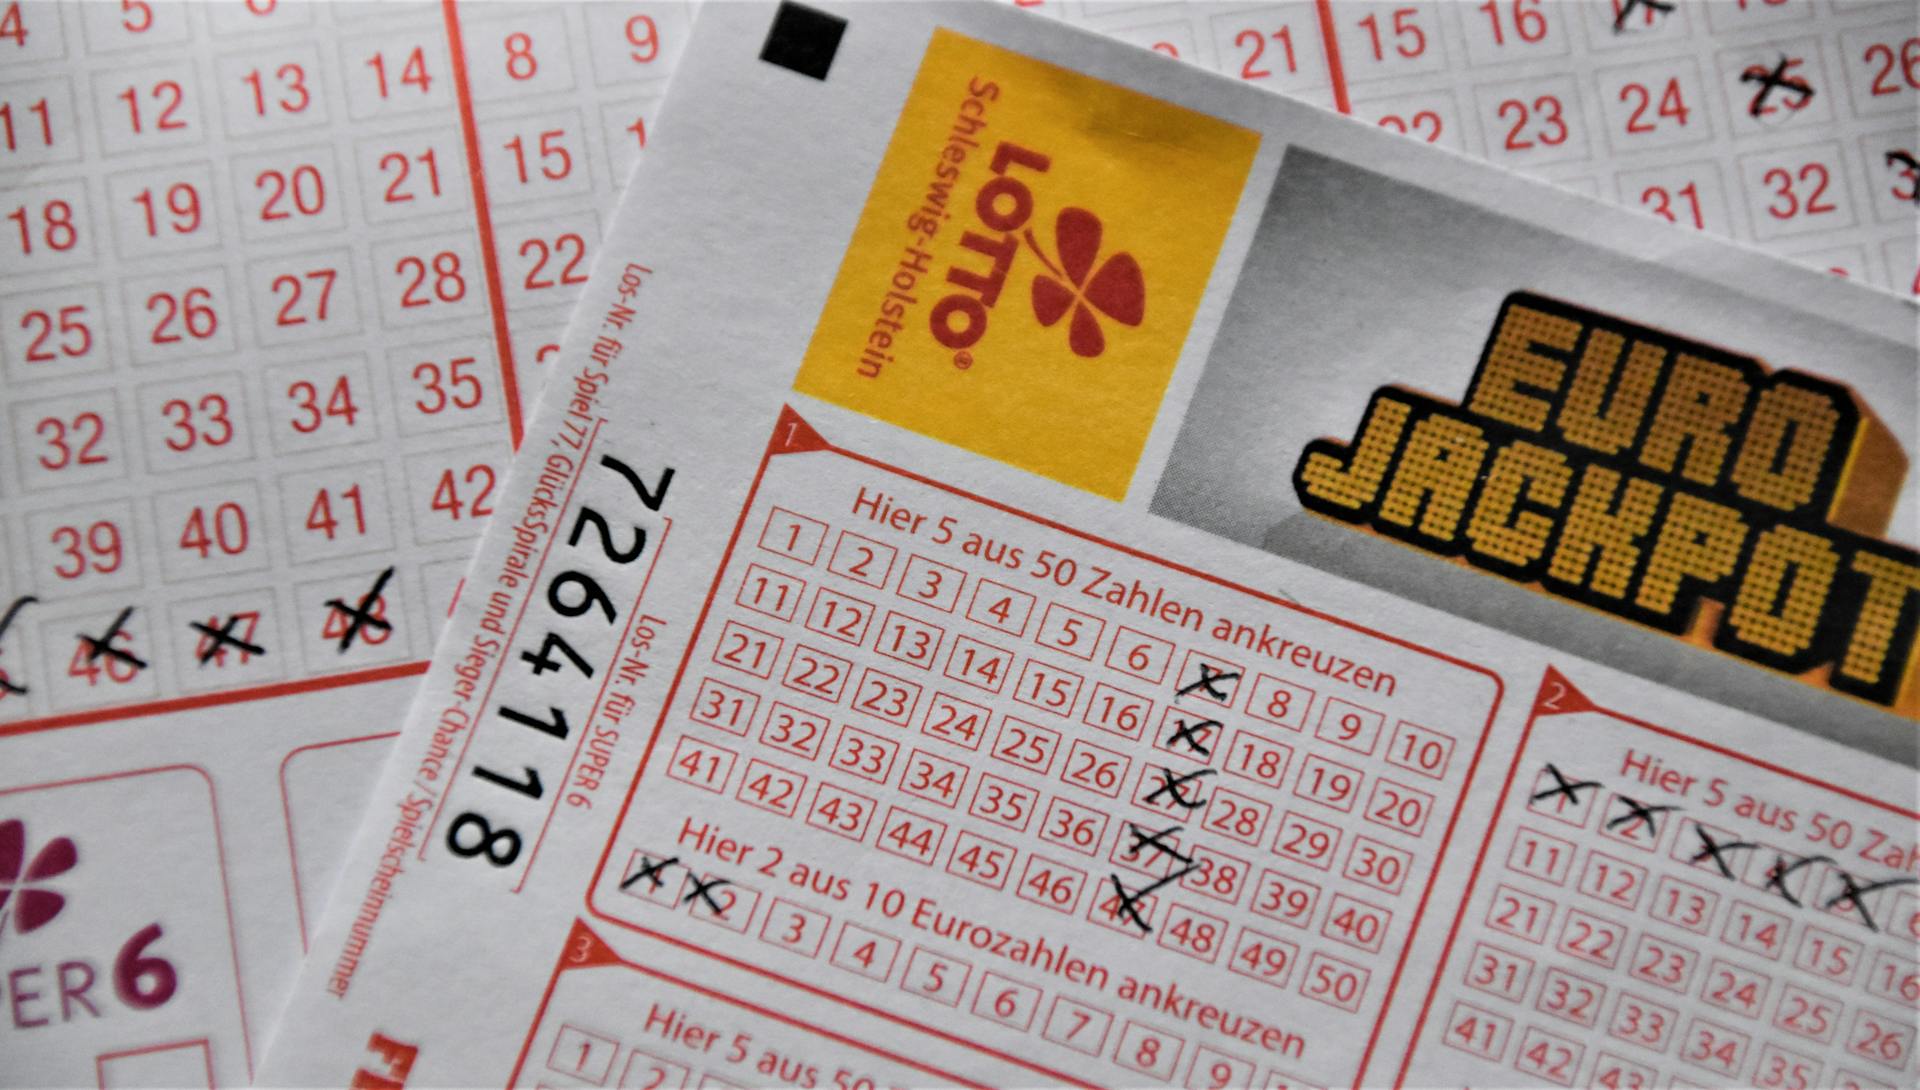 A close-up photo of a lottery ticket | Source: Pexels